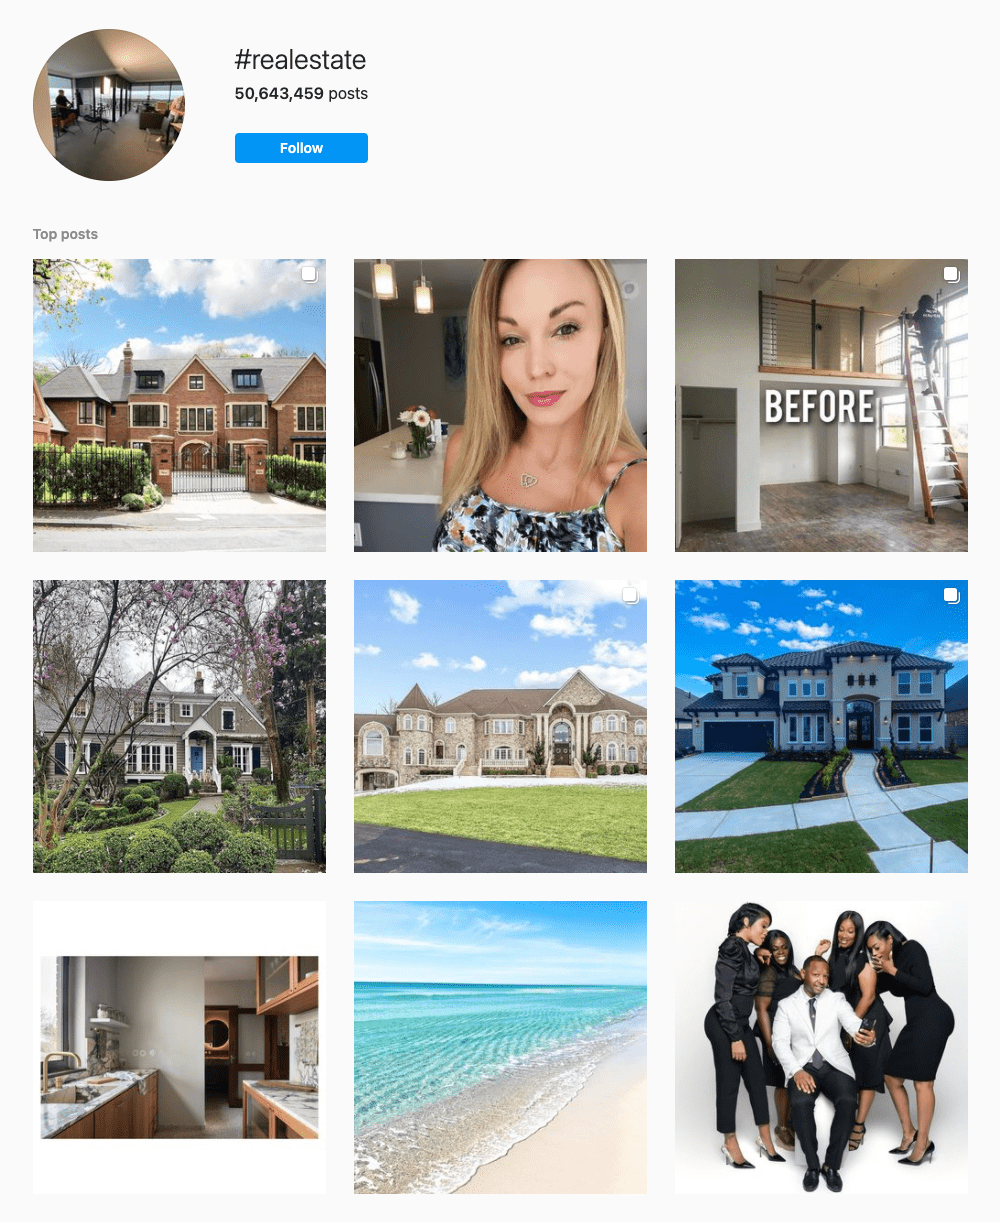 #realestate Hashtags for Instagram